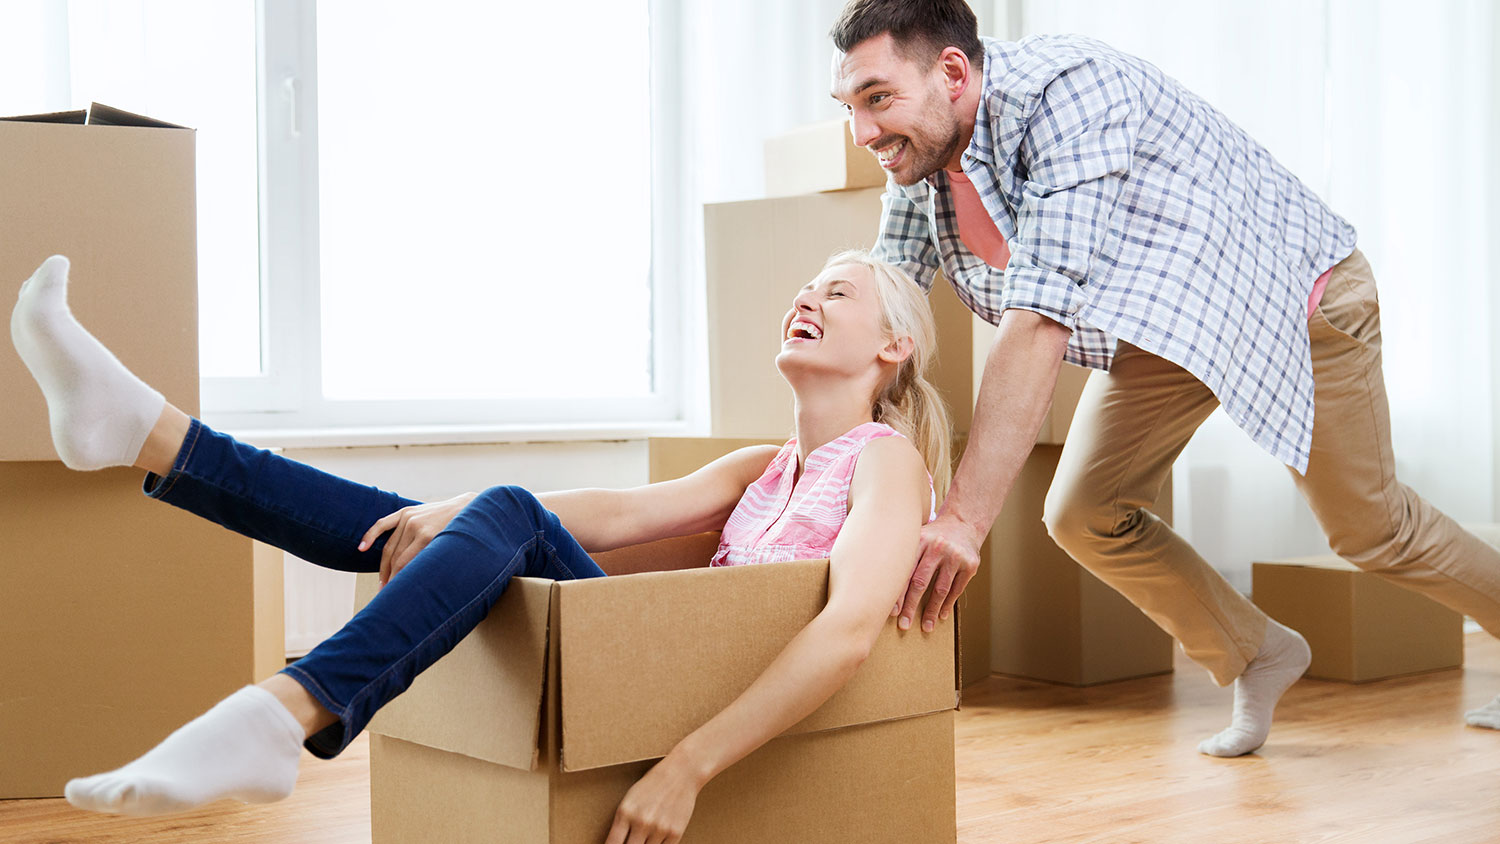 ftr-removalists-moving-boxes-couple.jpg